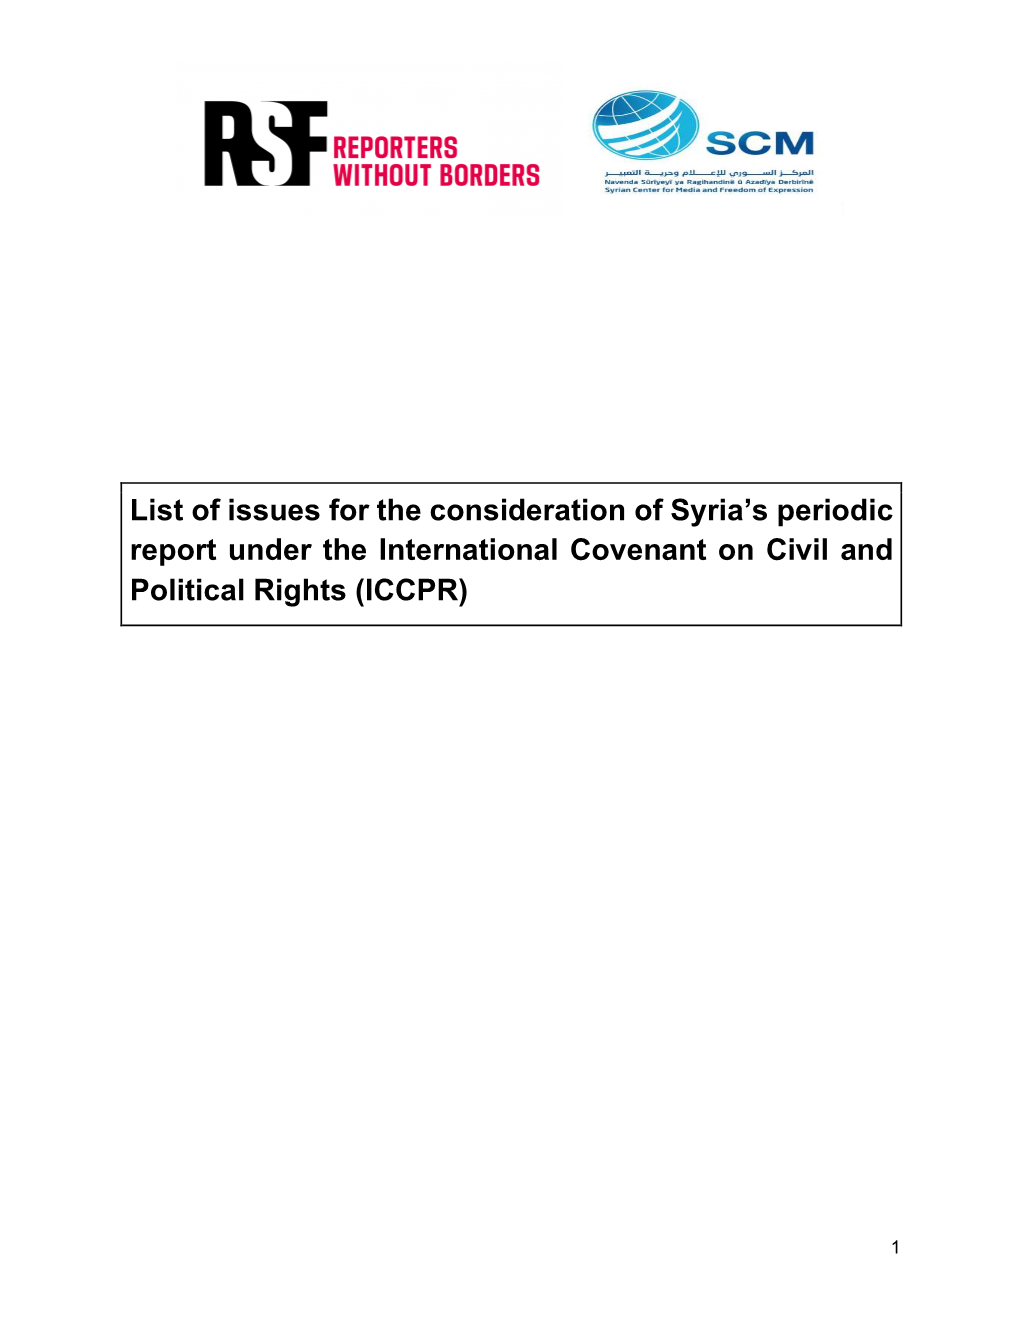 List of Issues for the Consideration of Syria's Periodic Report Under The